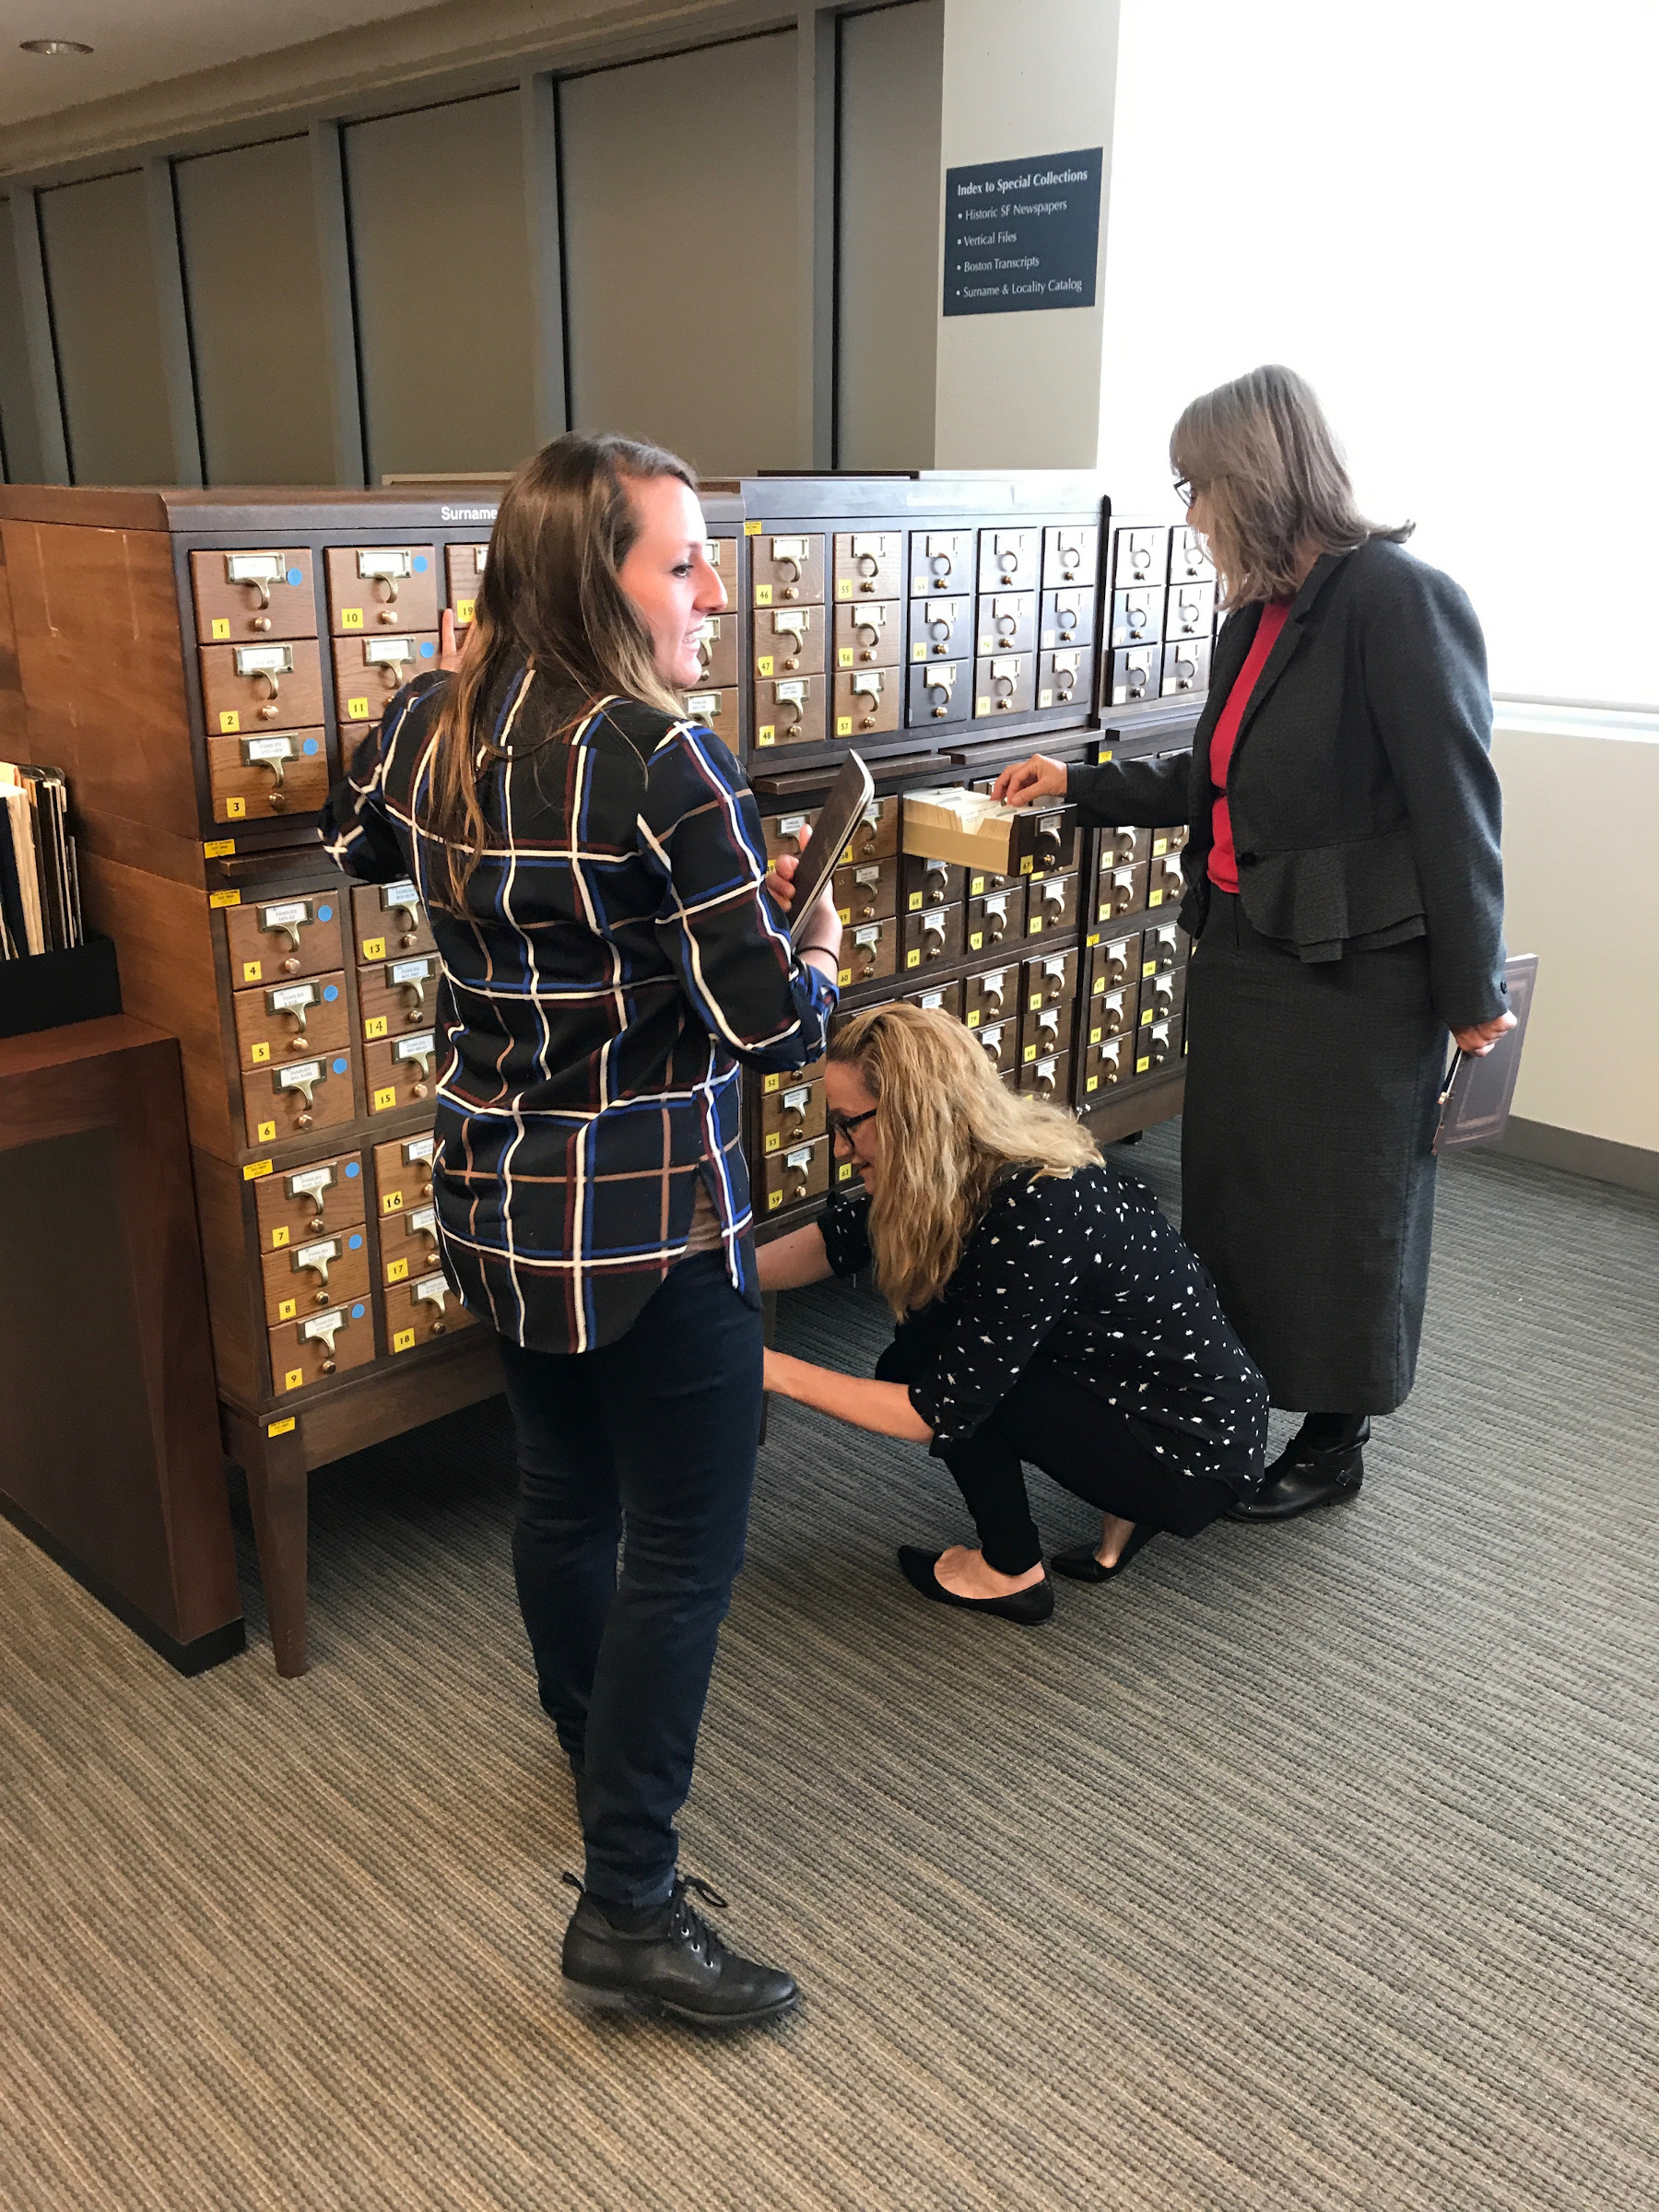 Students looking at the surname card catalog